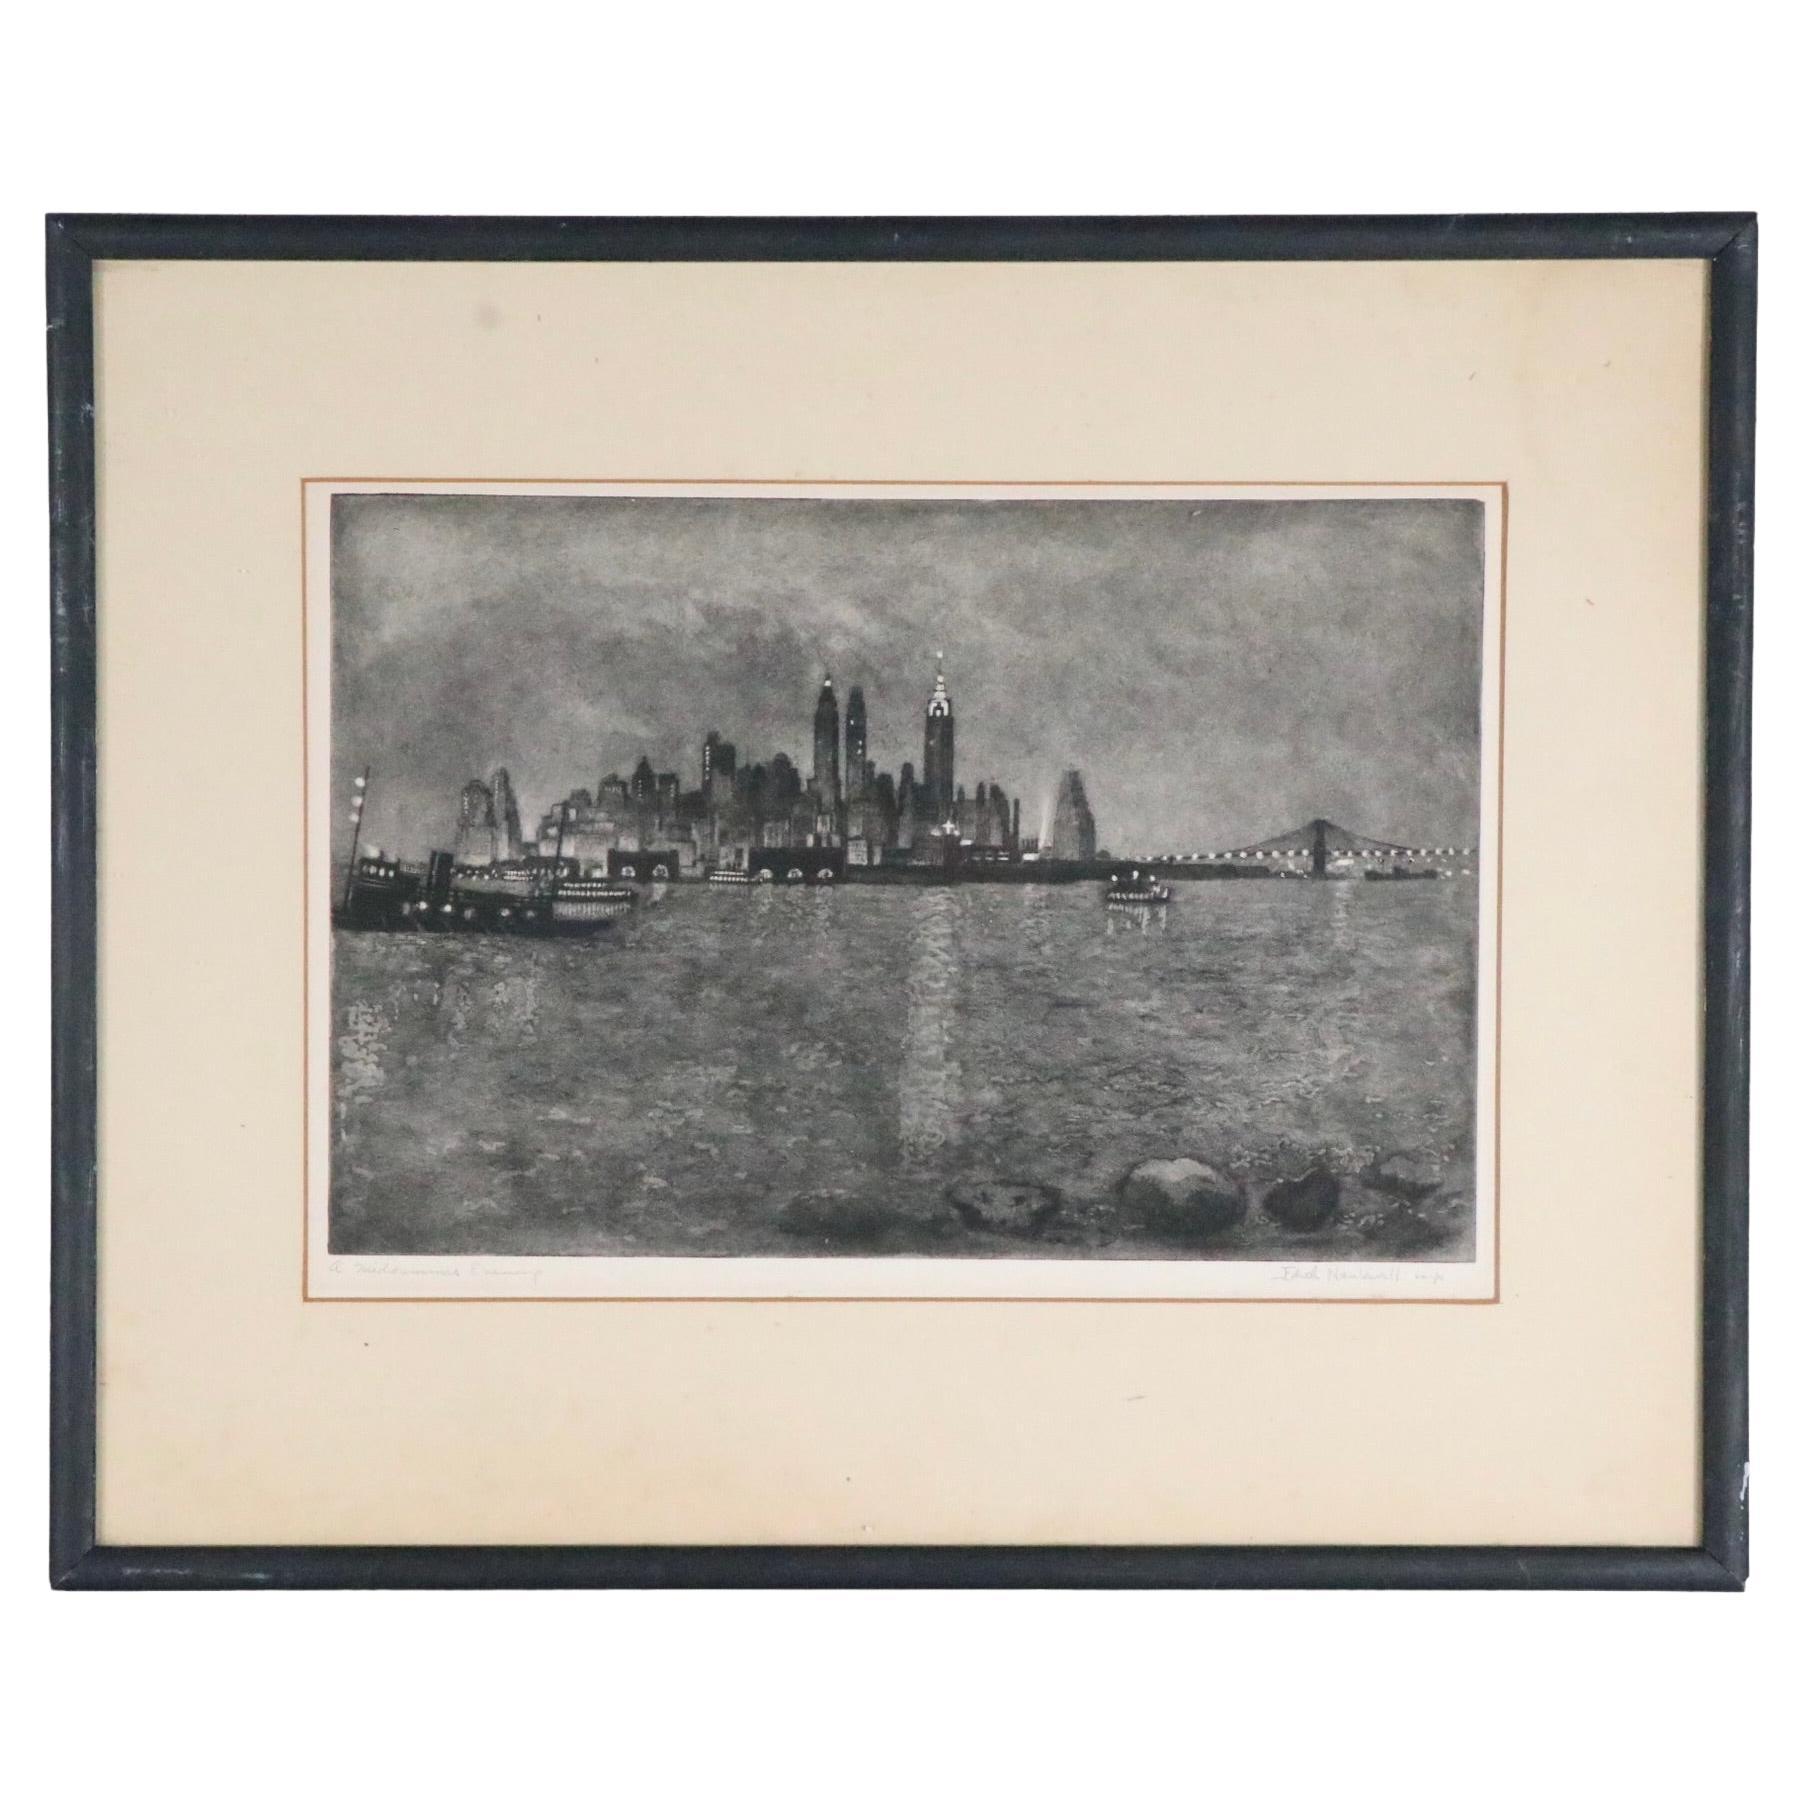 Framed NYC Scene Aquatint Etching by Edith Nankivell Pencil Signed, circa 1930s 